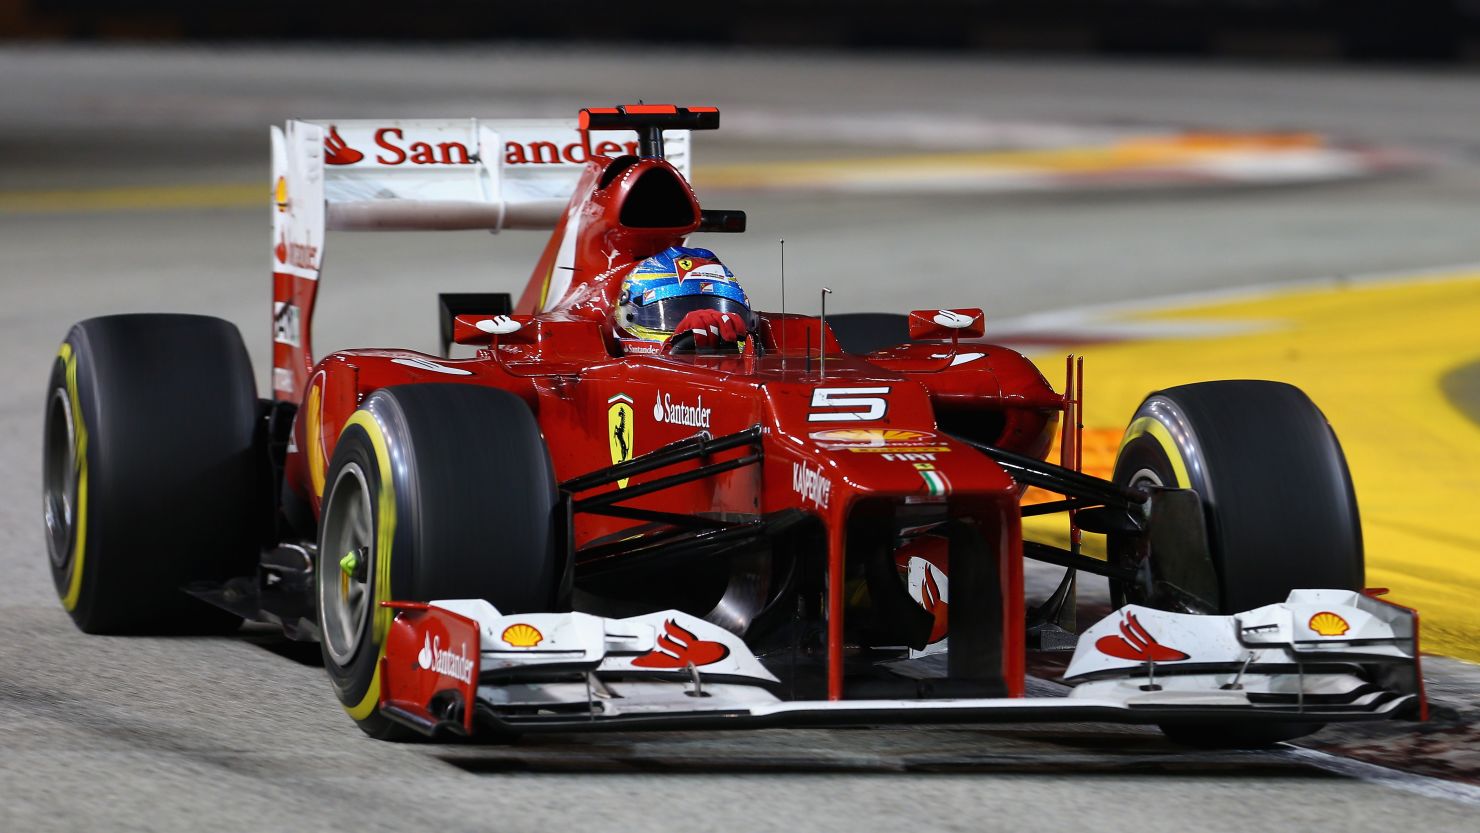 Ferrari's Fernando Alonso won back-to-back titles with McLaren in 2005 and 2006.